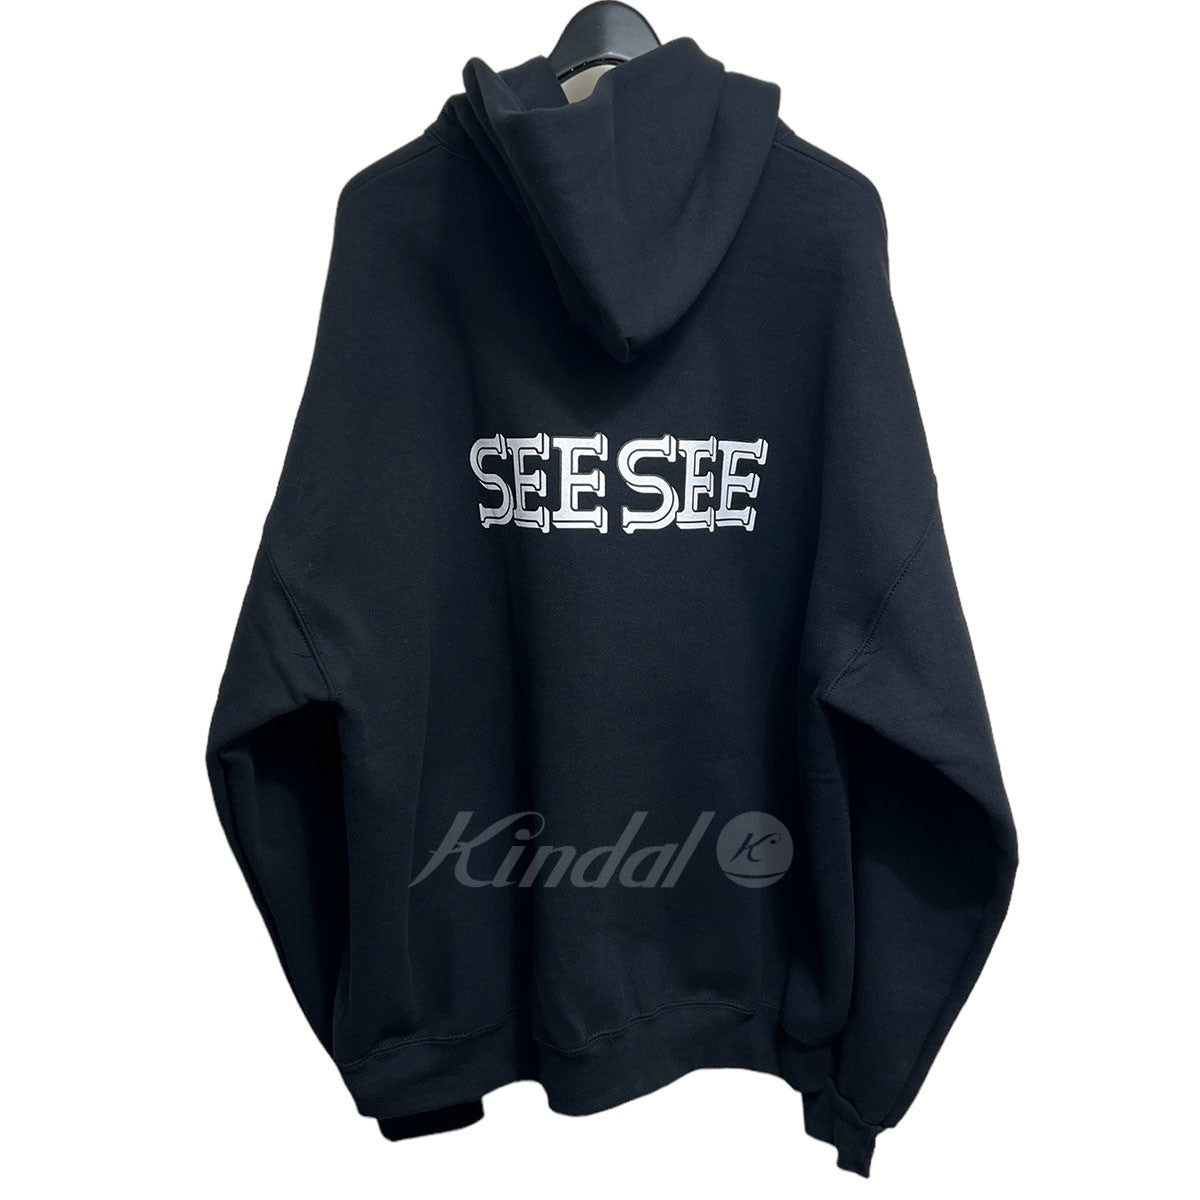 COLOSEE SEE FONT LOGO HOODIE